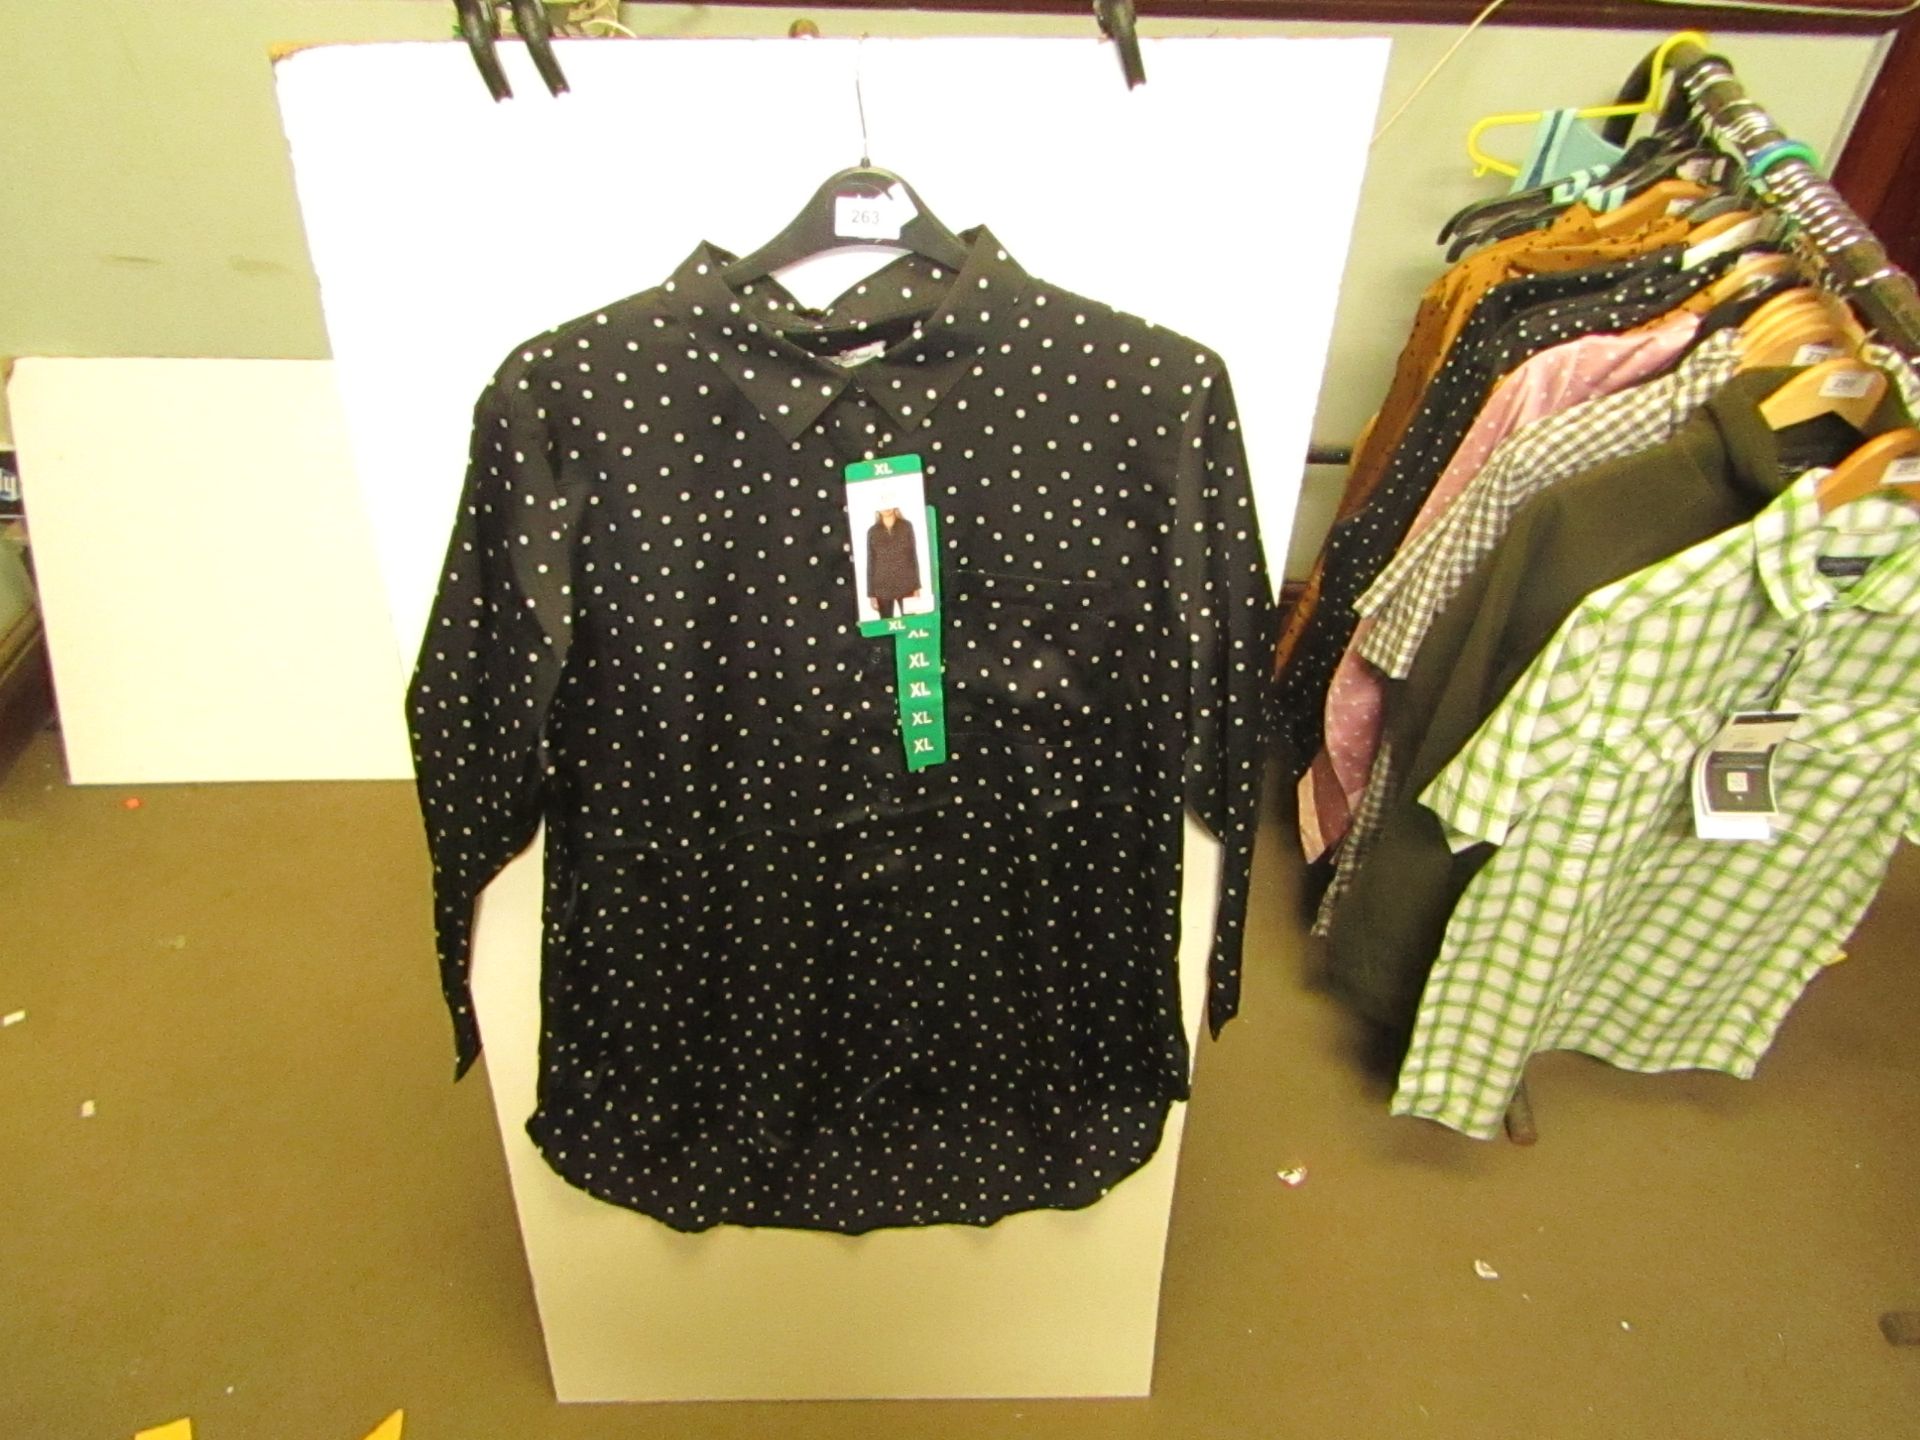 J.A.C.H.S Girlfriend Ladies Blouse Black With White Dots Size X/L RRP £35 New With Tags